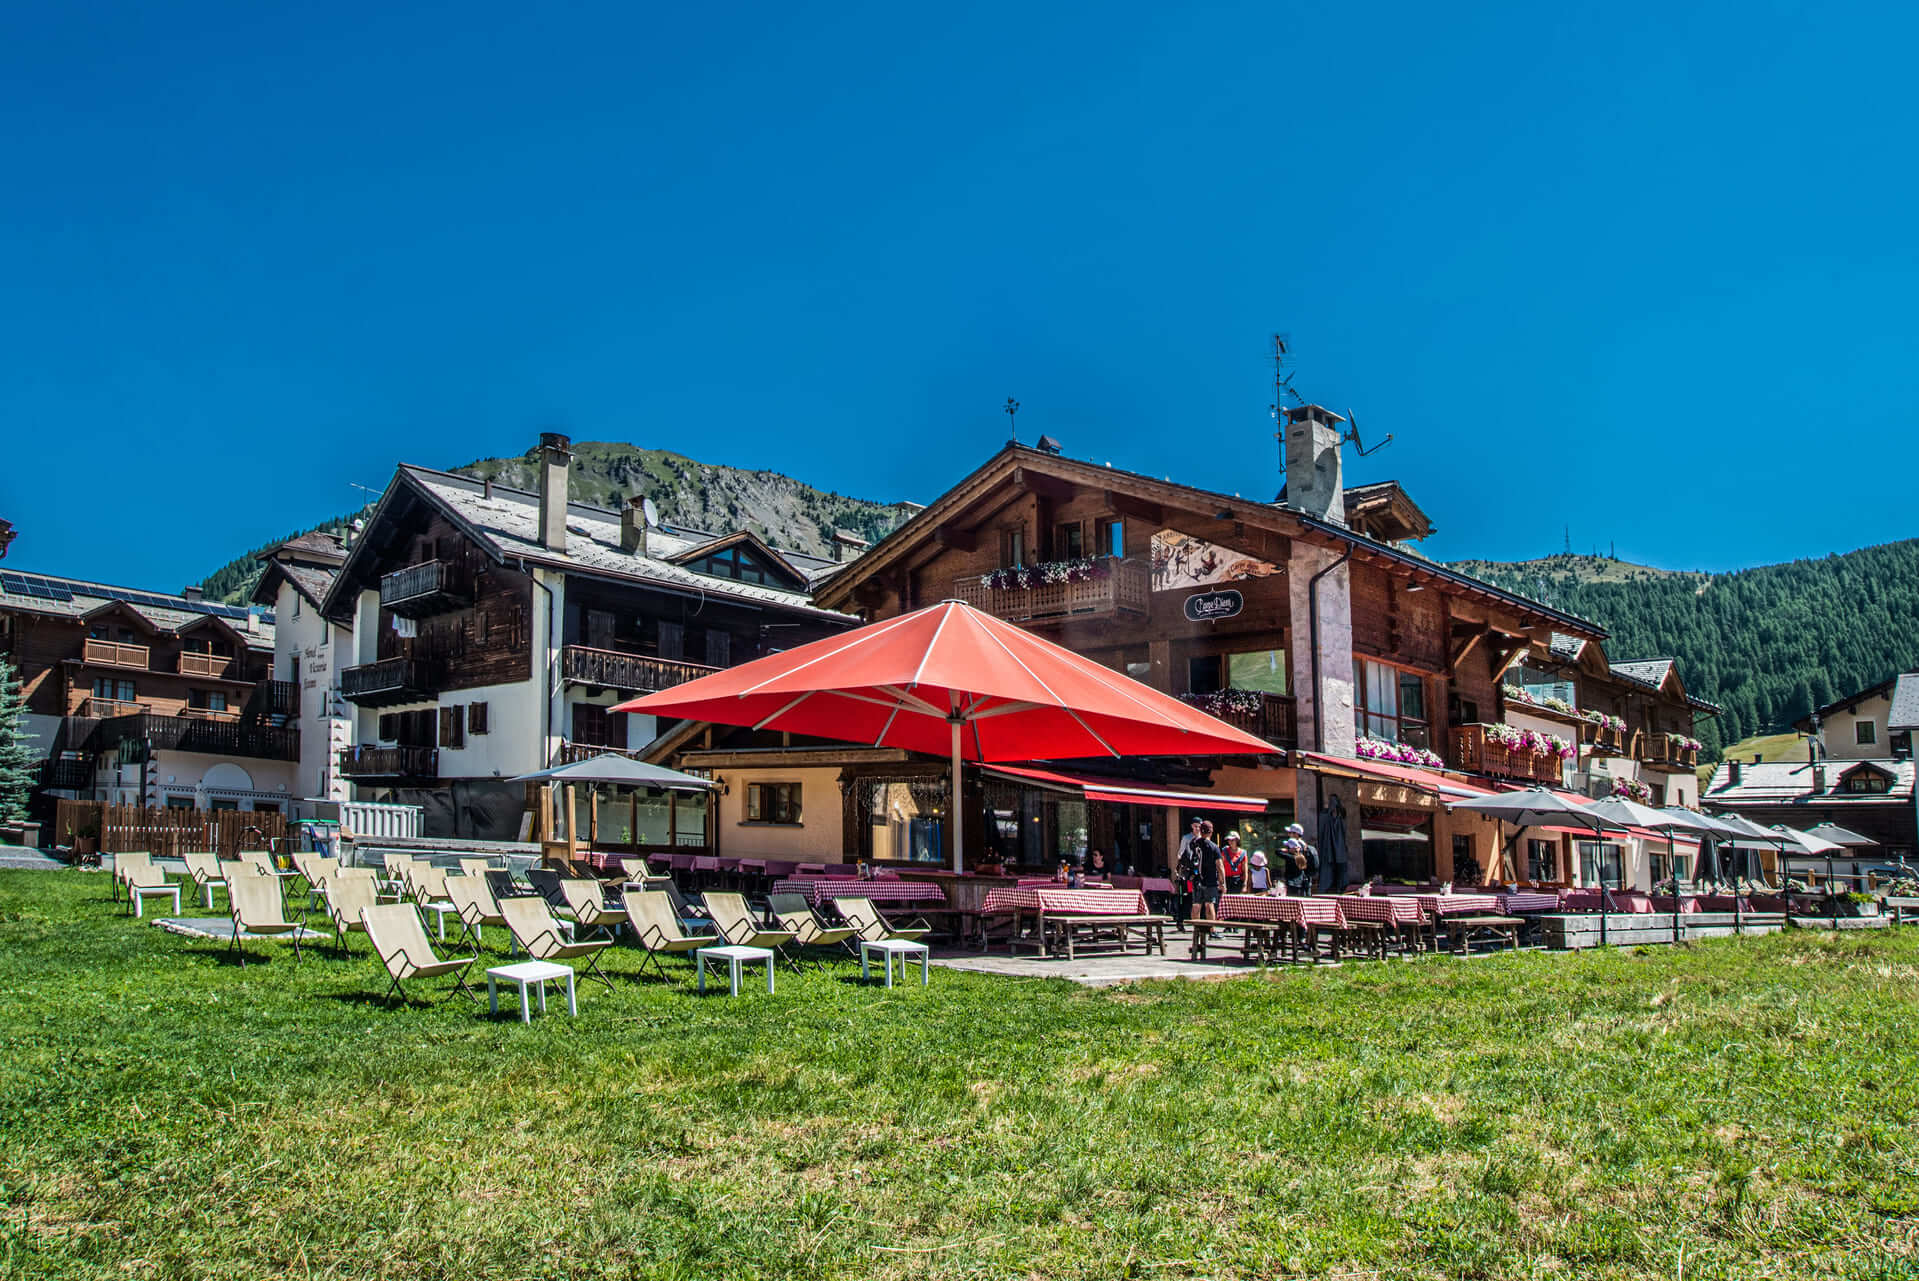 Hotel Carpe Diem Livigno for summer holiday in the Alps